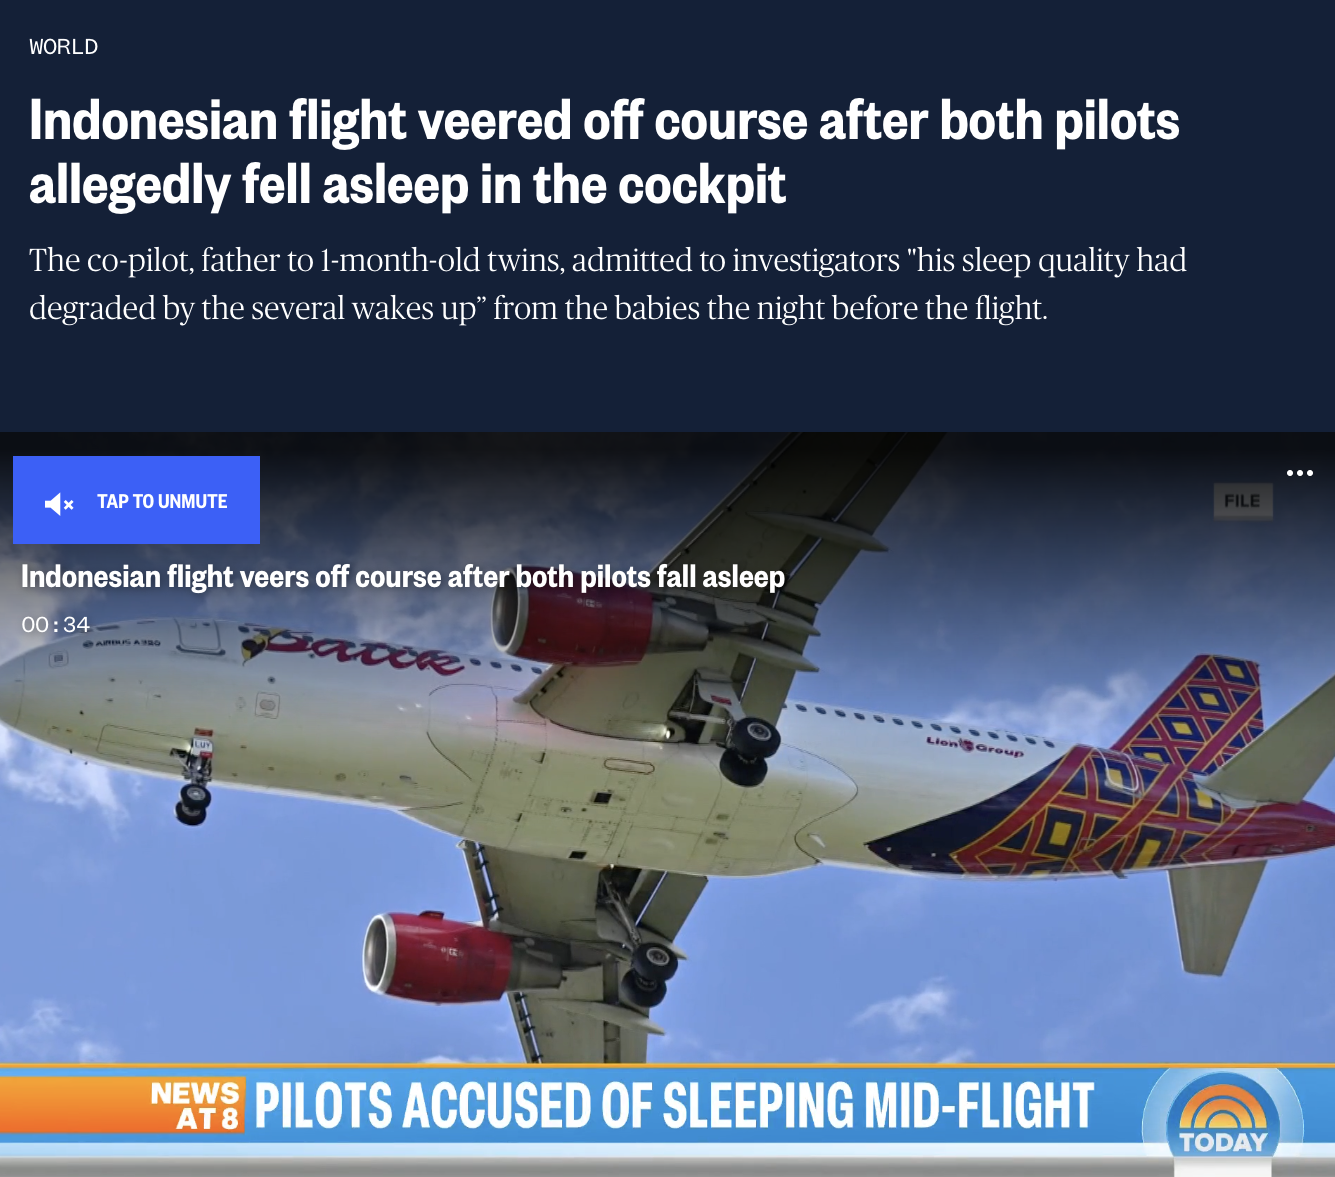 airline - World Indonesian flight veered off course after both pilots allegedly fell asleep in the cockpit The copilot, father to 1monthold twins, admitted to investigators "his sleep quality had degraded by the several wakes up" from the babies the night